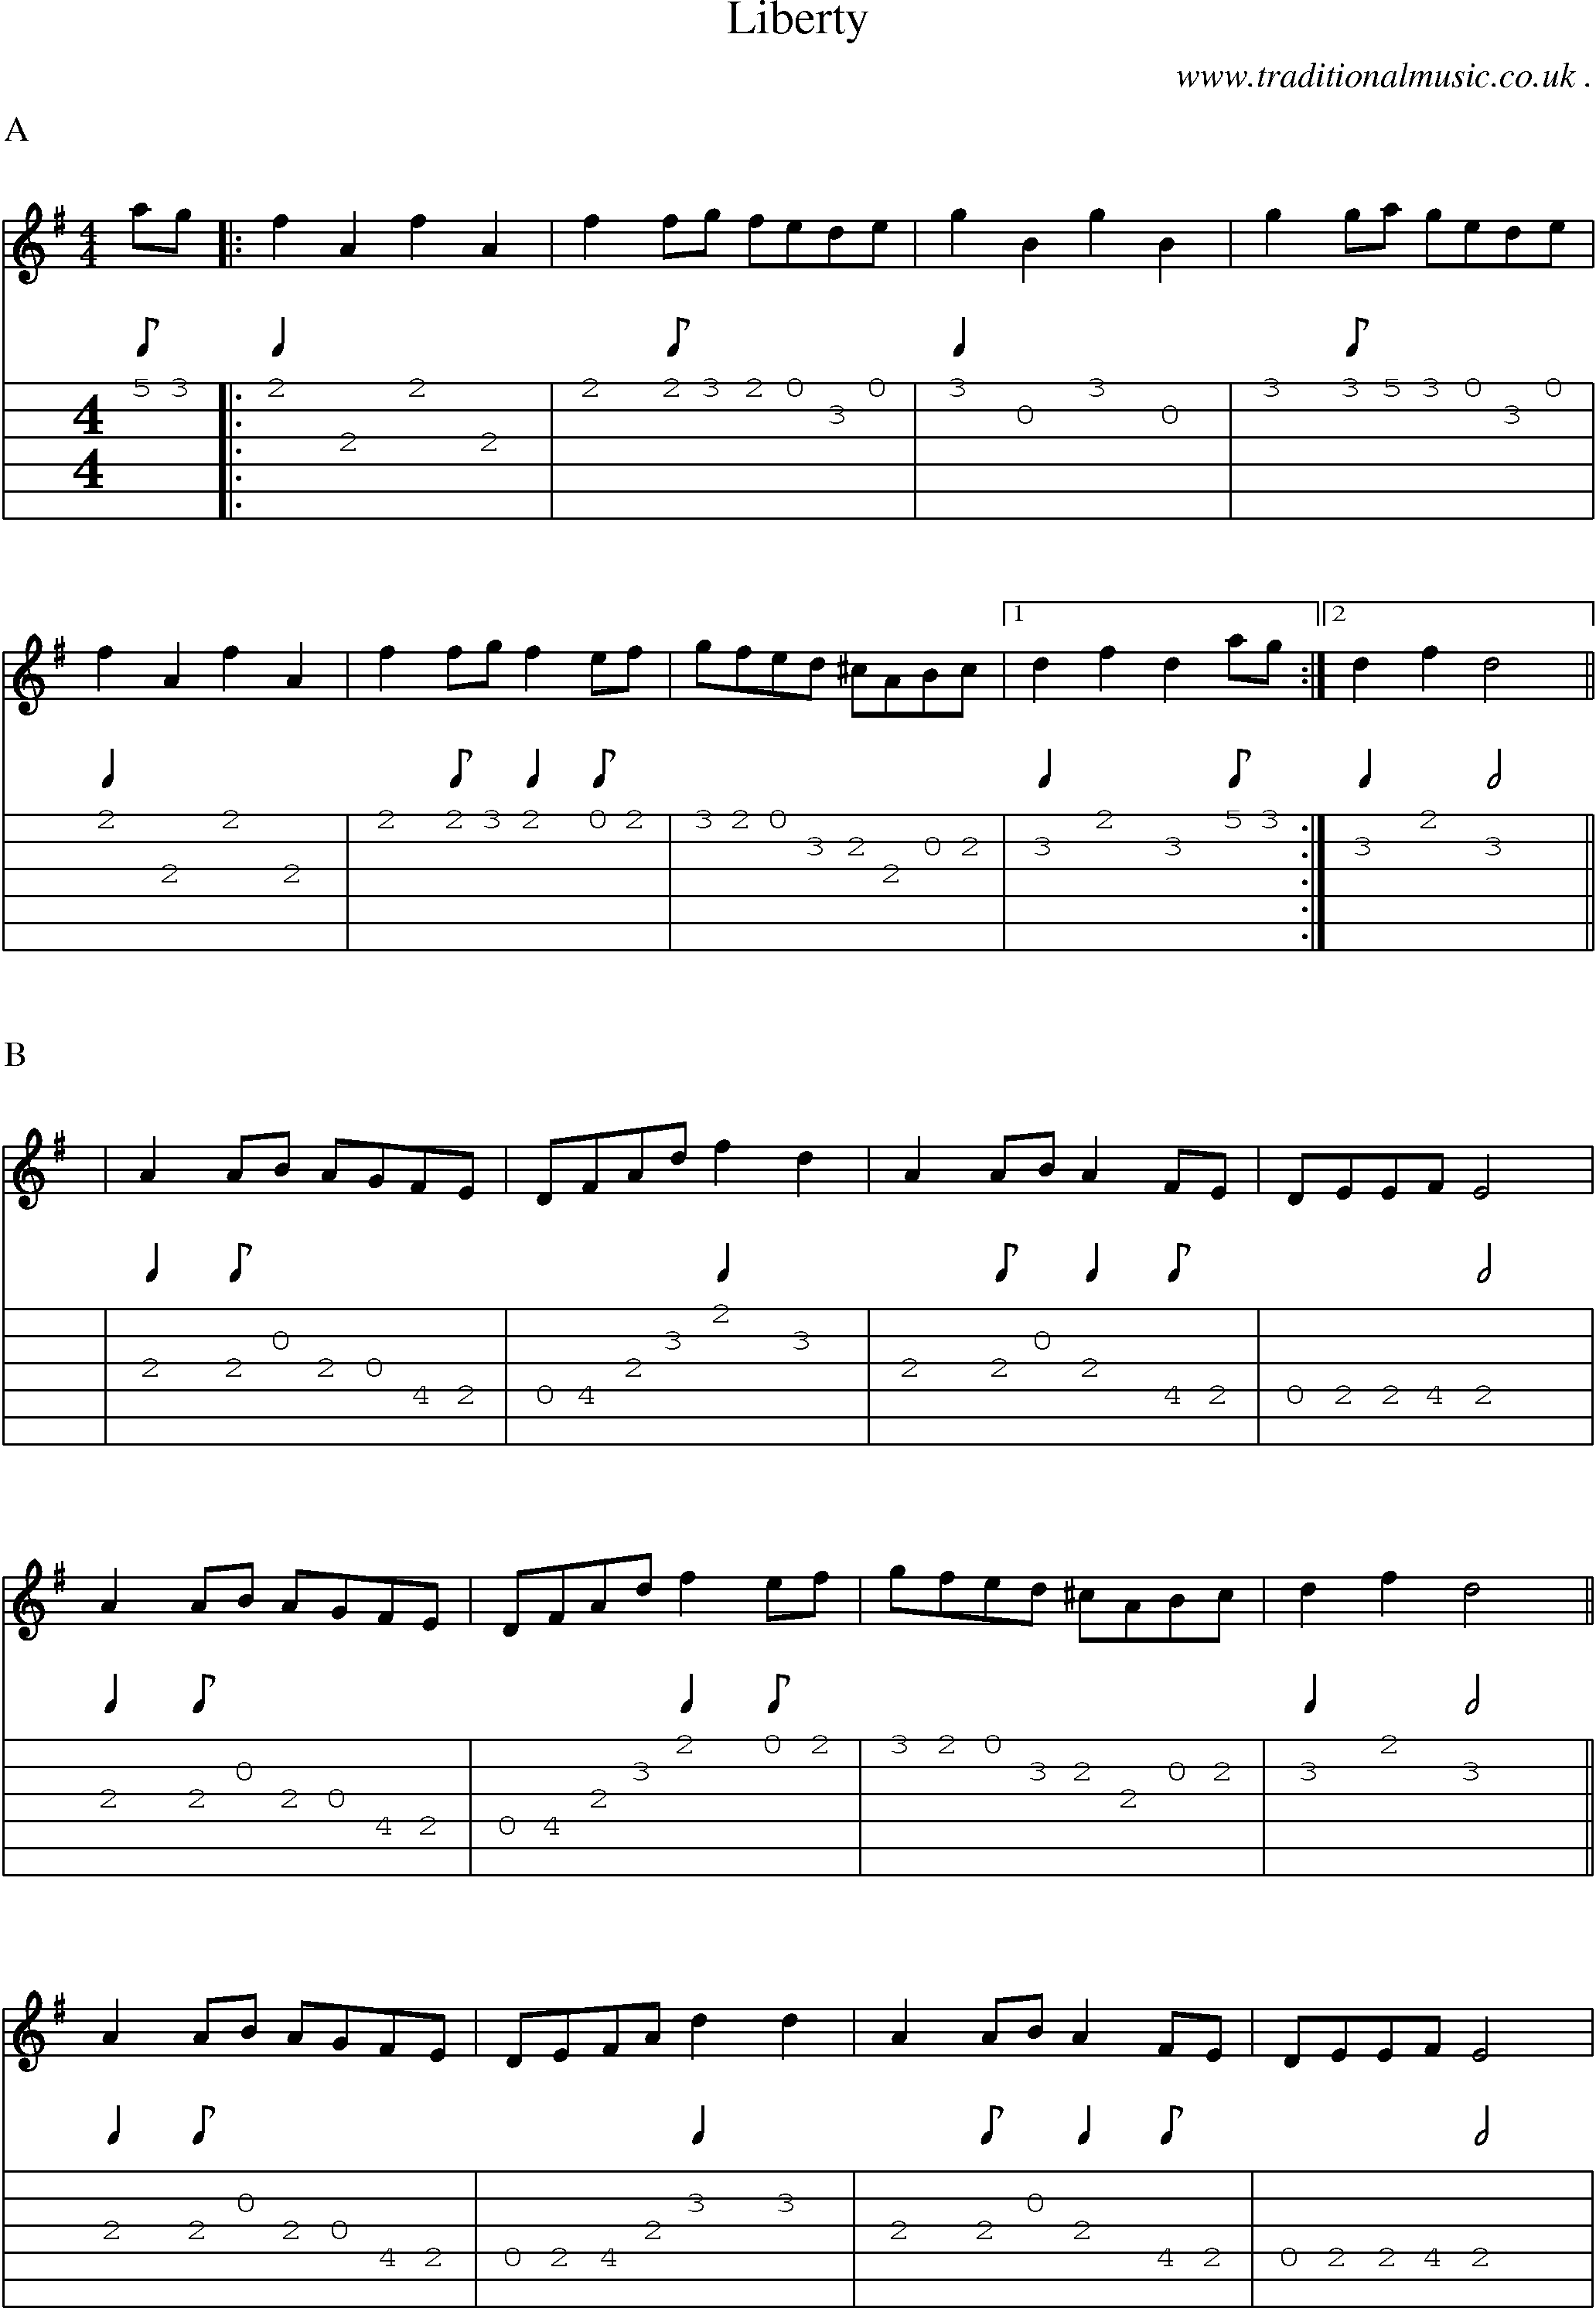 Music Score and Guitar Tabs for Liberty